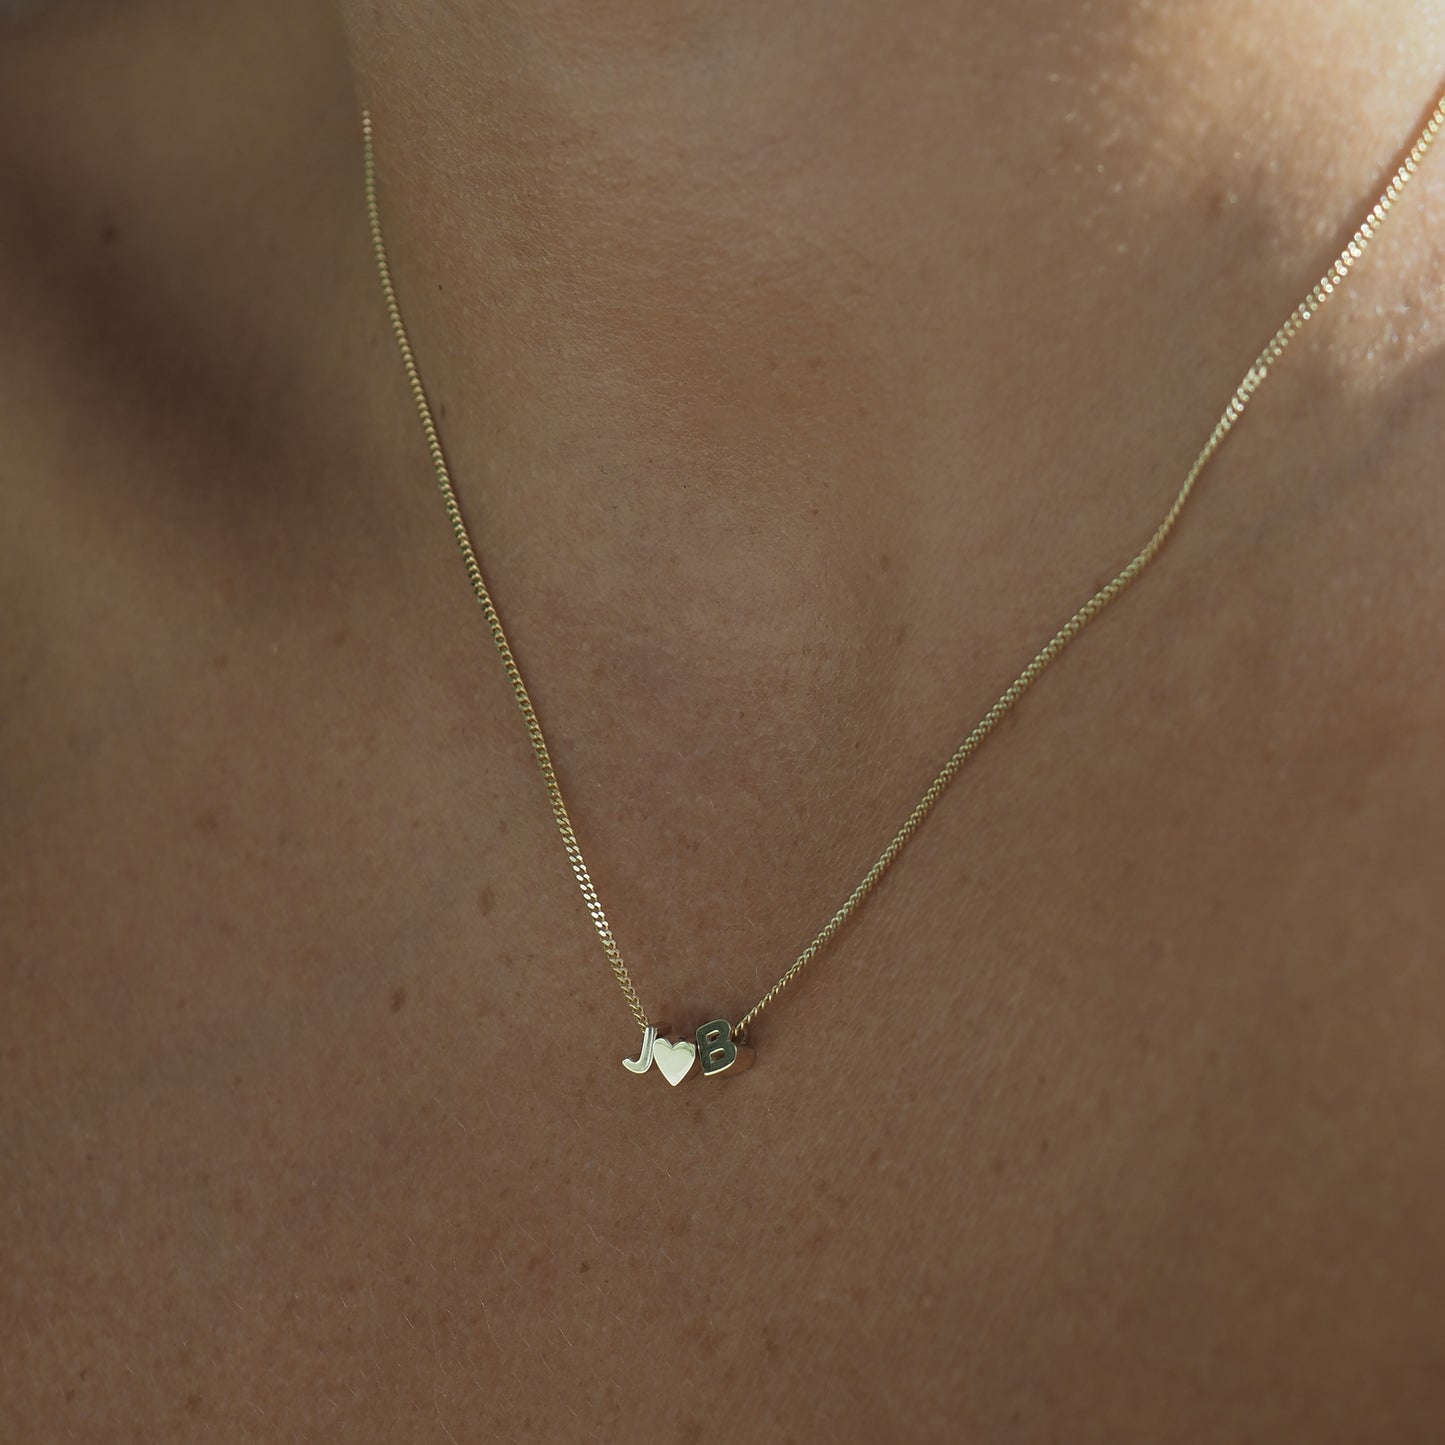 The Tiny Heart Necklace features a gold heart fixed in the centre of a yellow gold chain, personalised with two letters either side of the heart. 